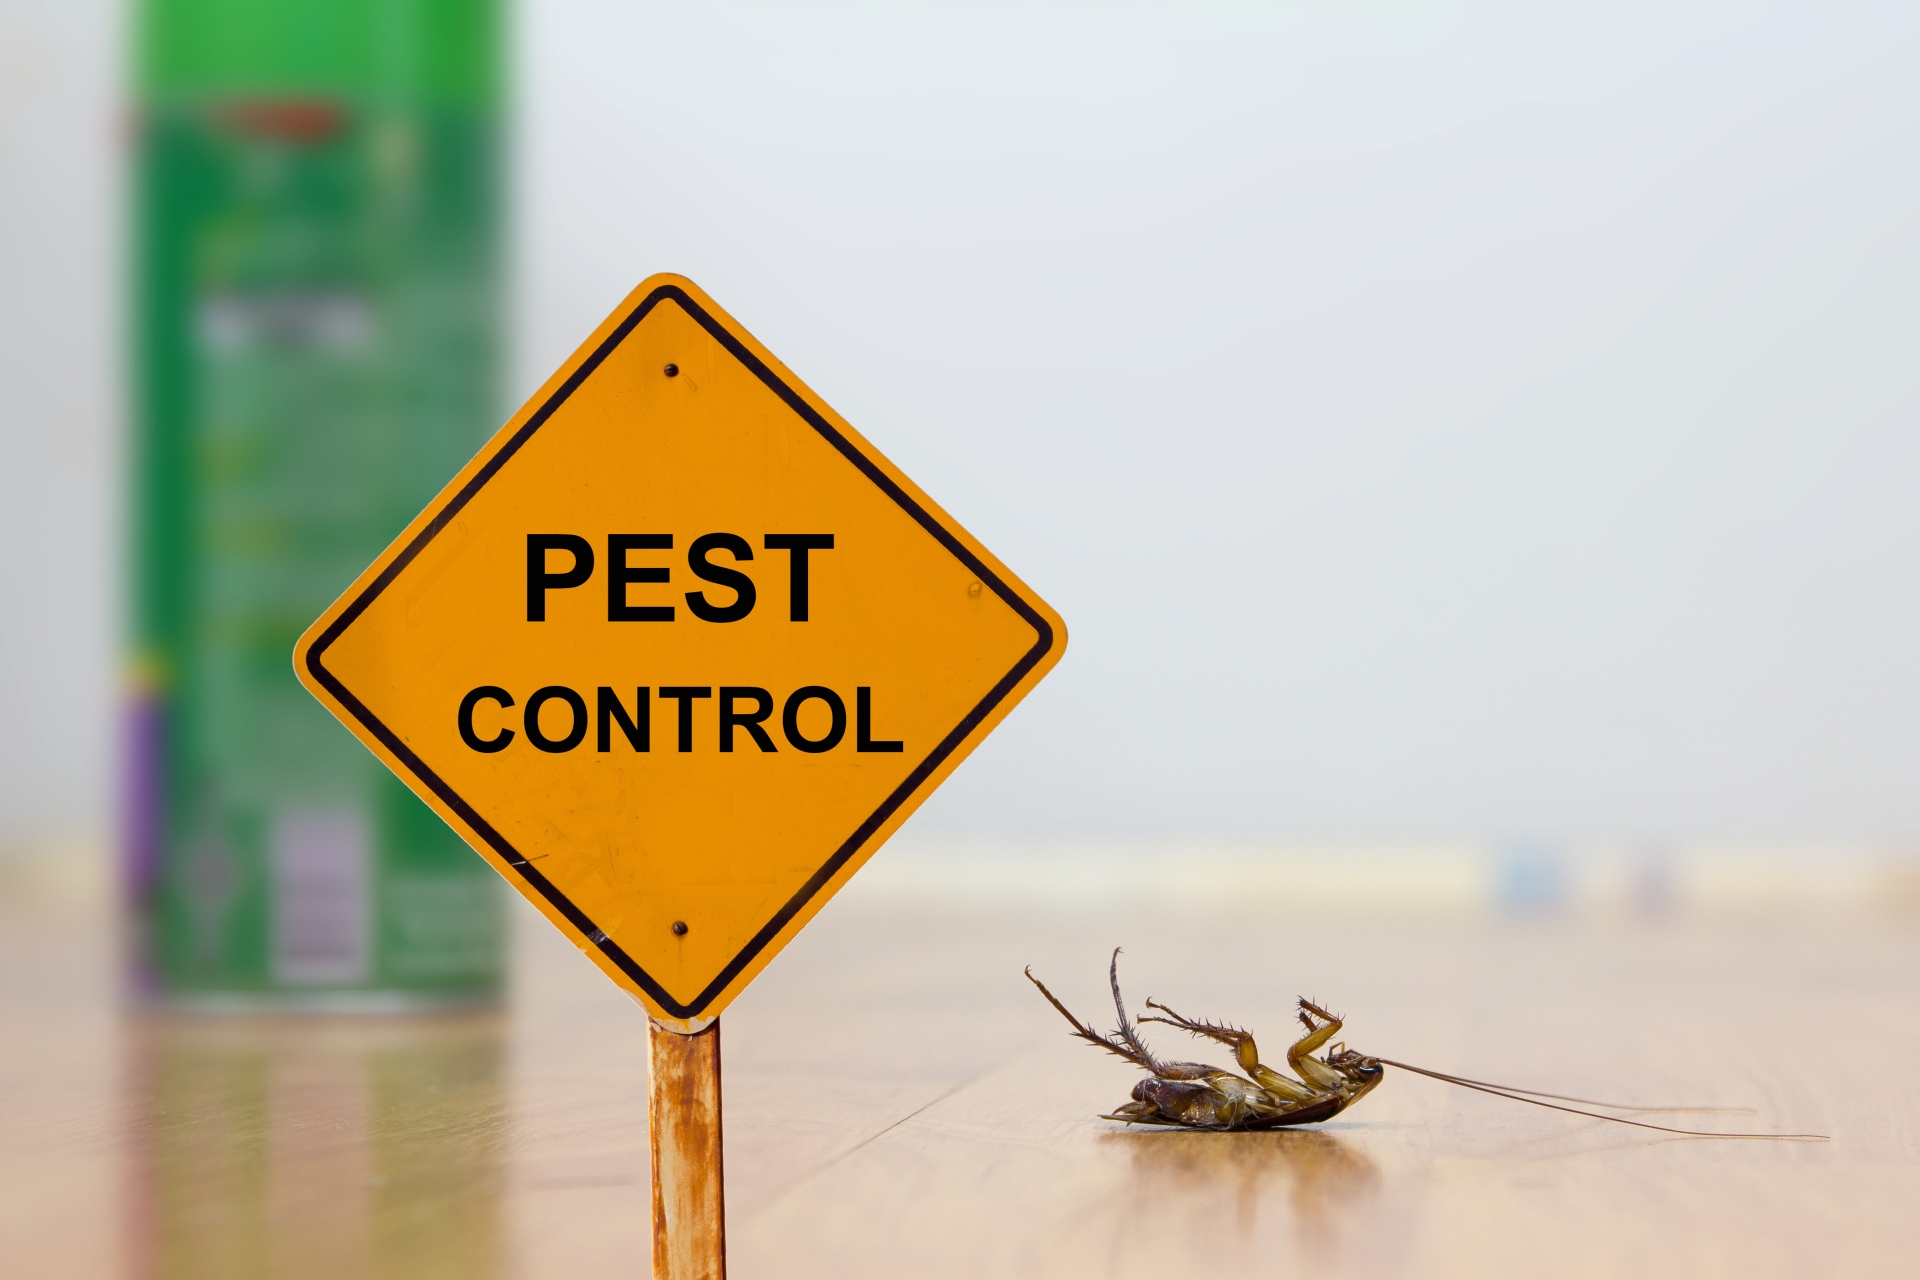 24 Hour Pest Control, Pest Control in Seven Kings, Goodmayes, IG3. Call Now 020 8166 9746